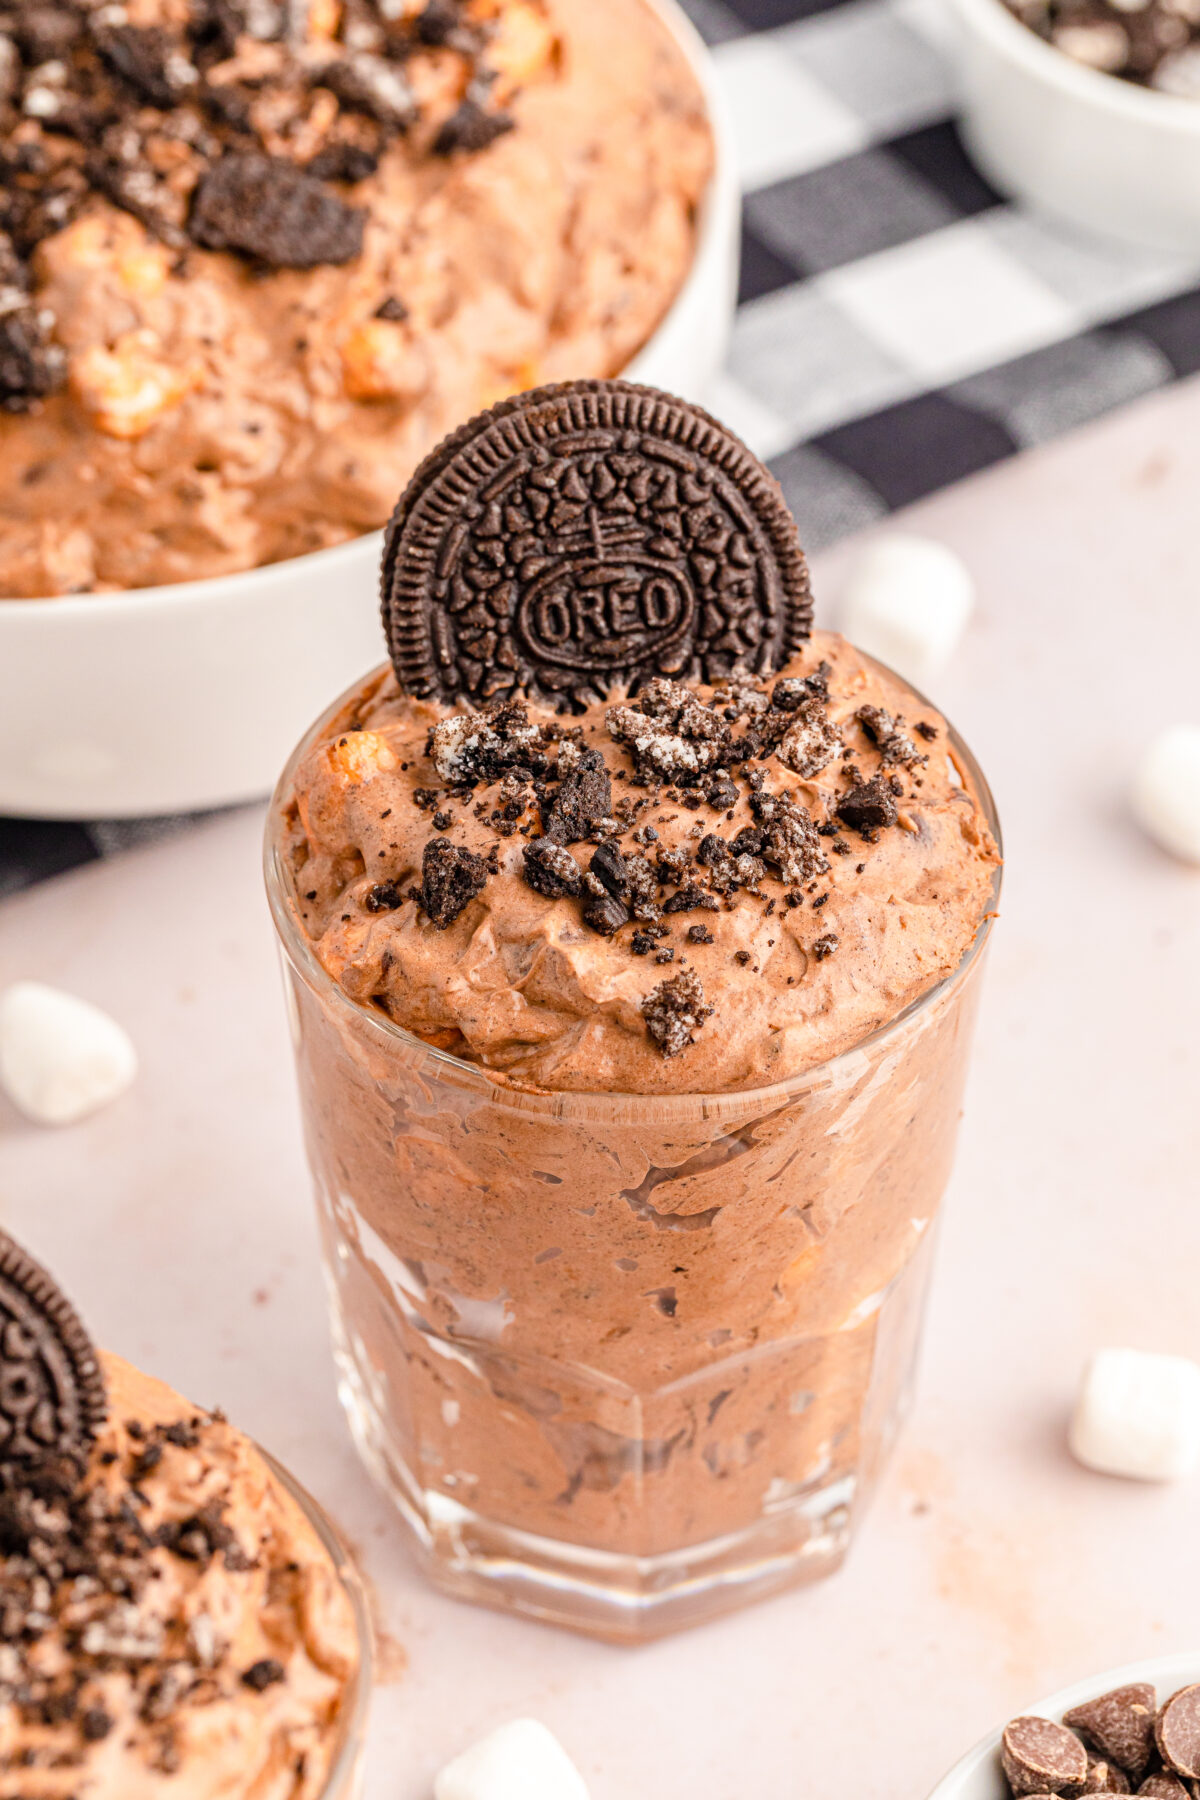 With just 6 simple ingredients you can make this creamy, fluffy, and tasty Oreo Fluff Salad recipe. Perfect for parties or special occasions!